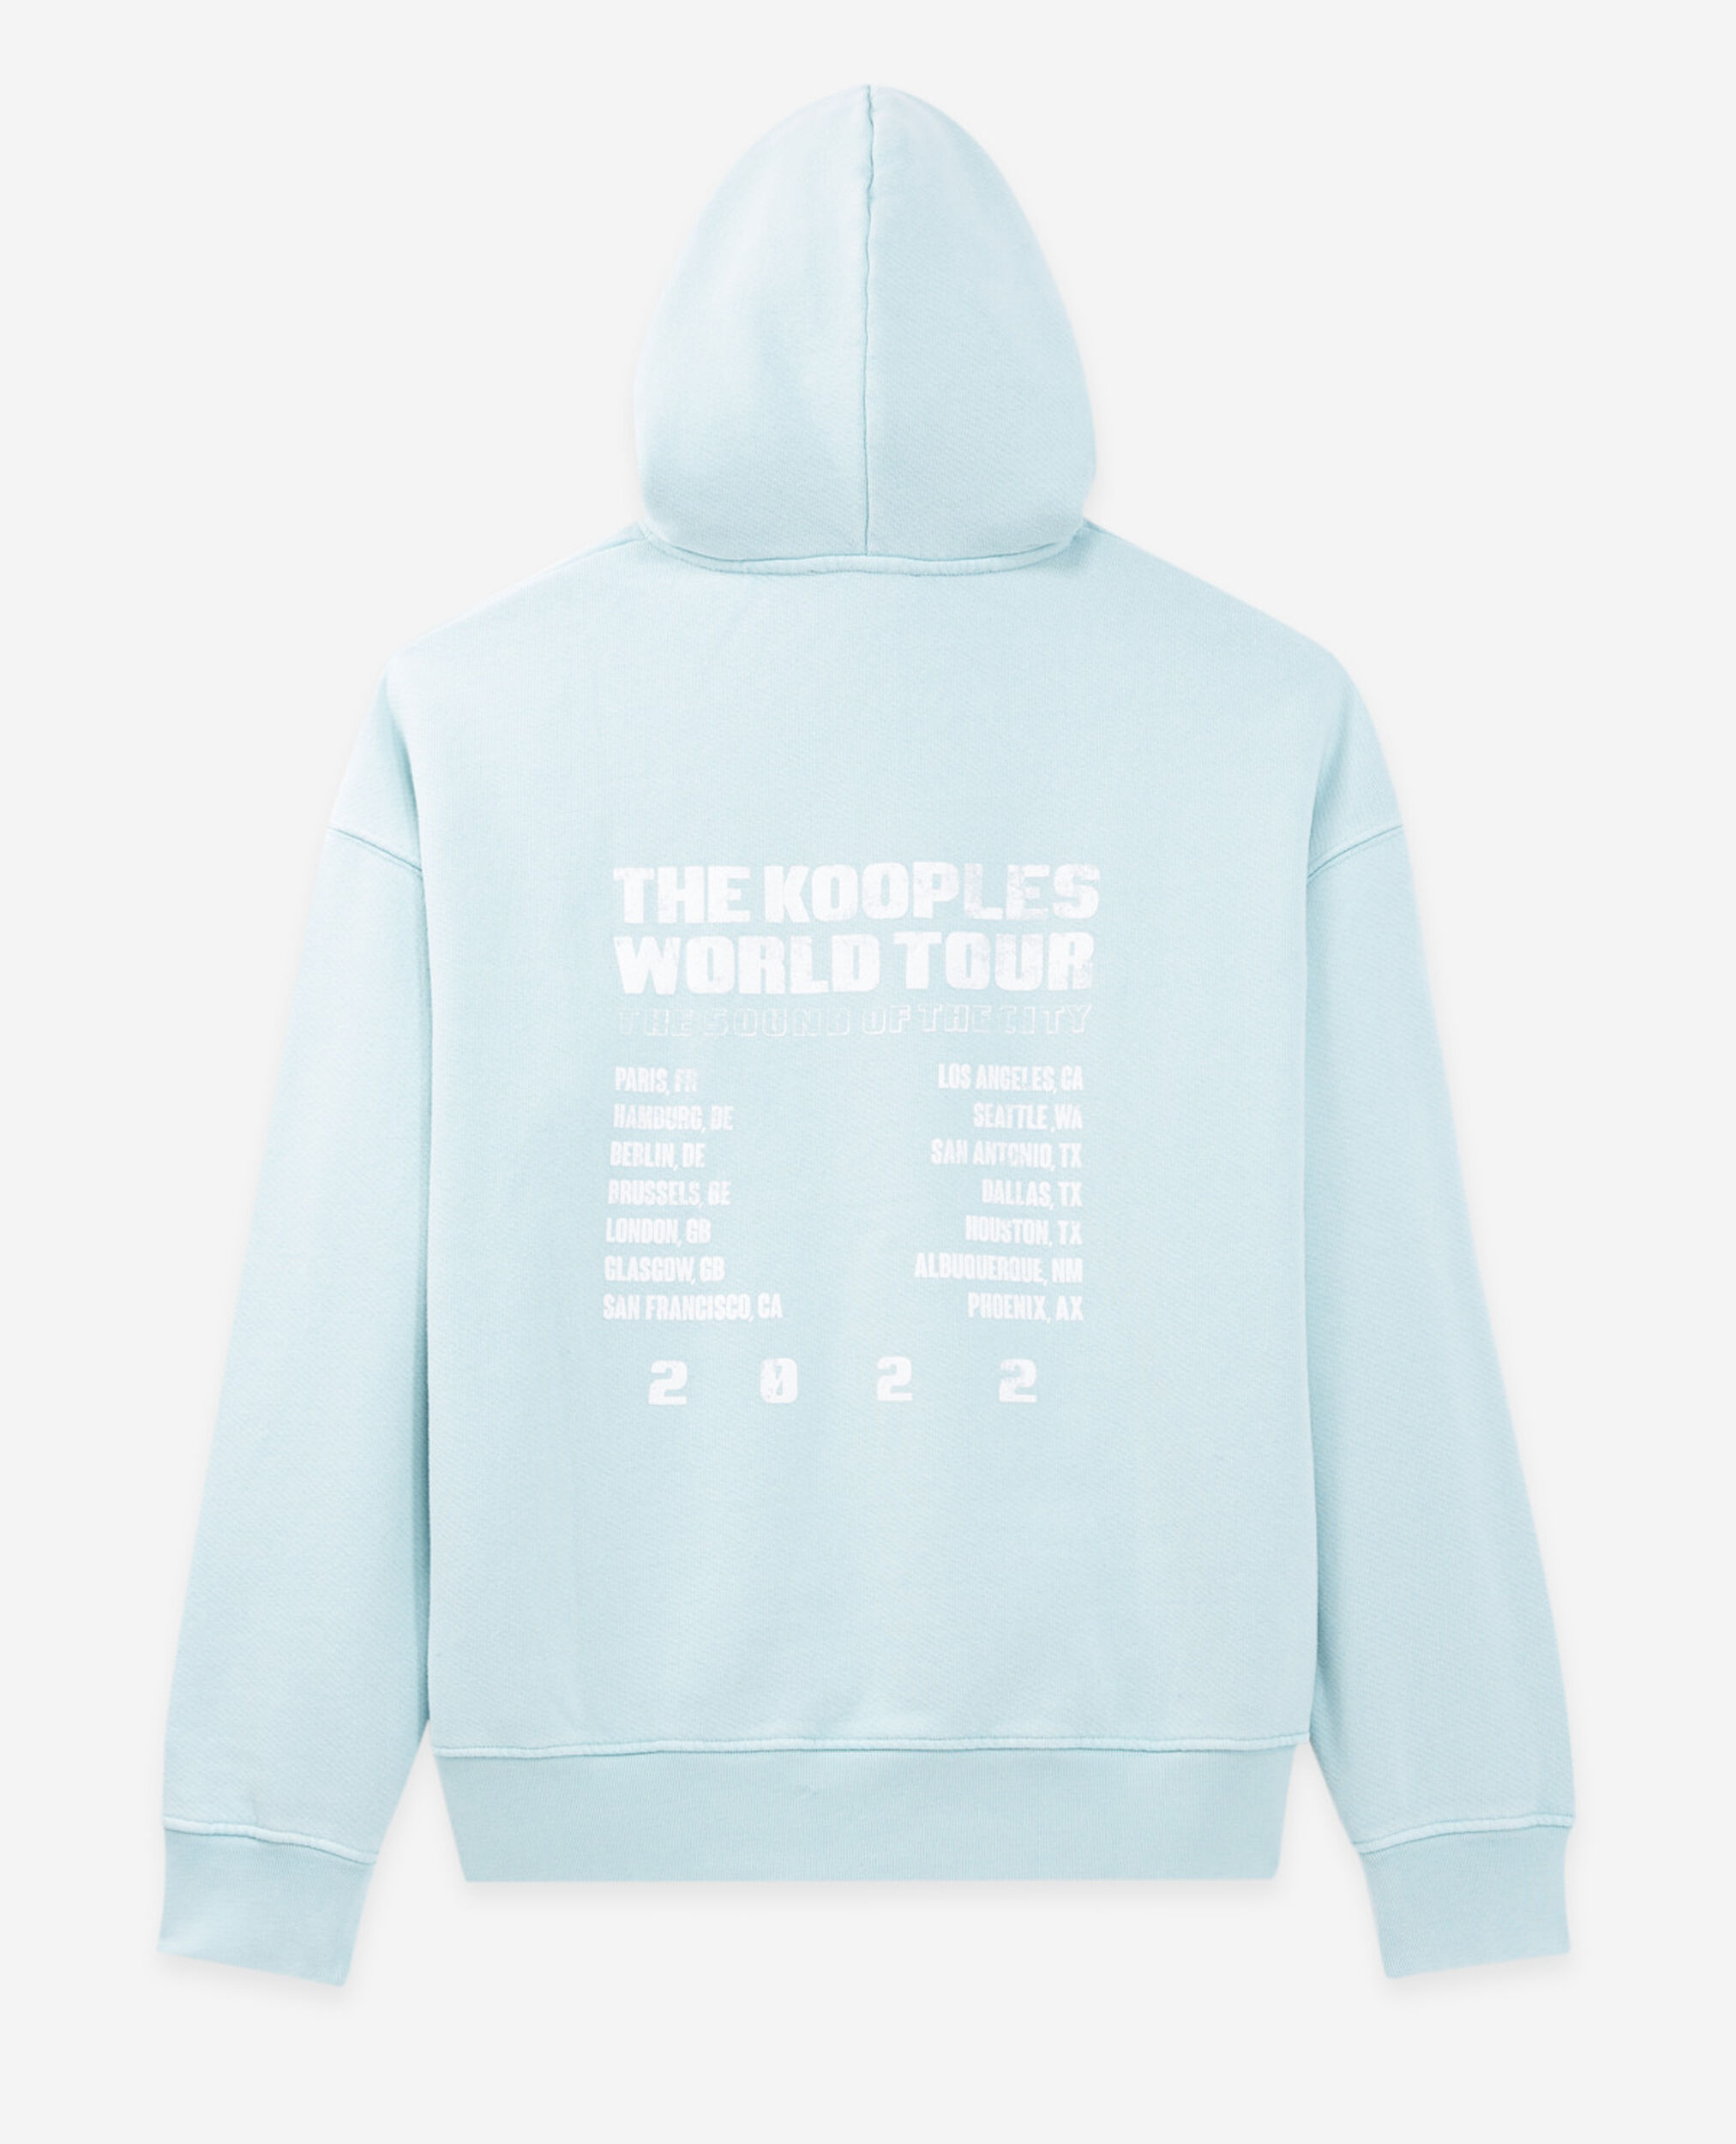 Sky blue hoodie with oversized print, BLUE SKY, hi-res image number null